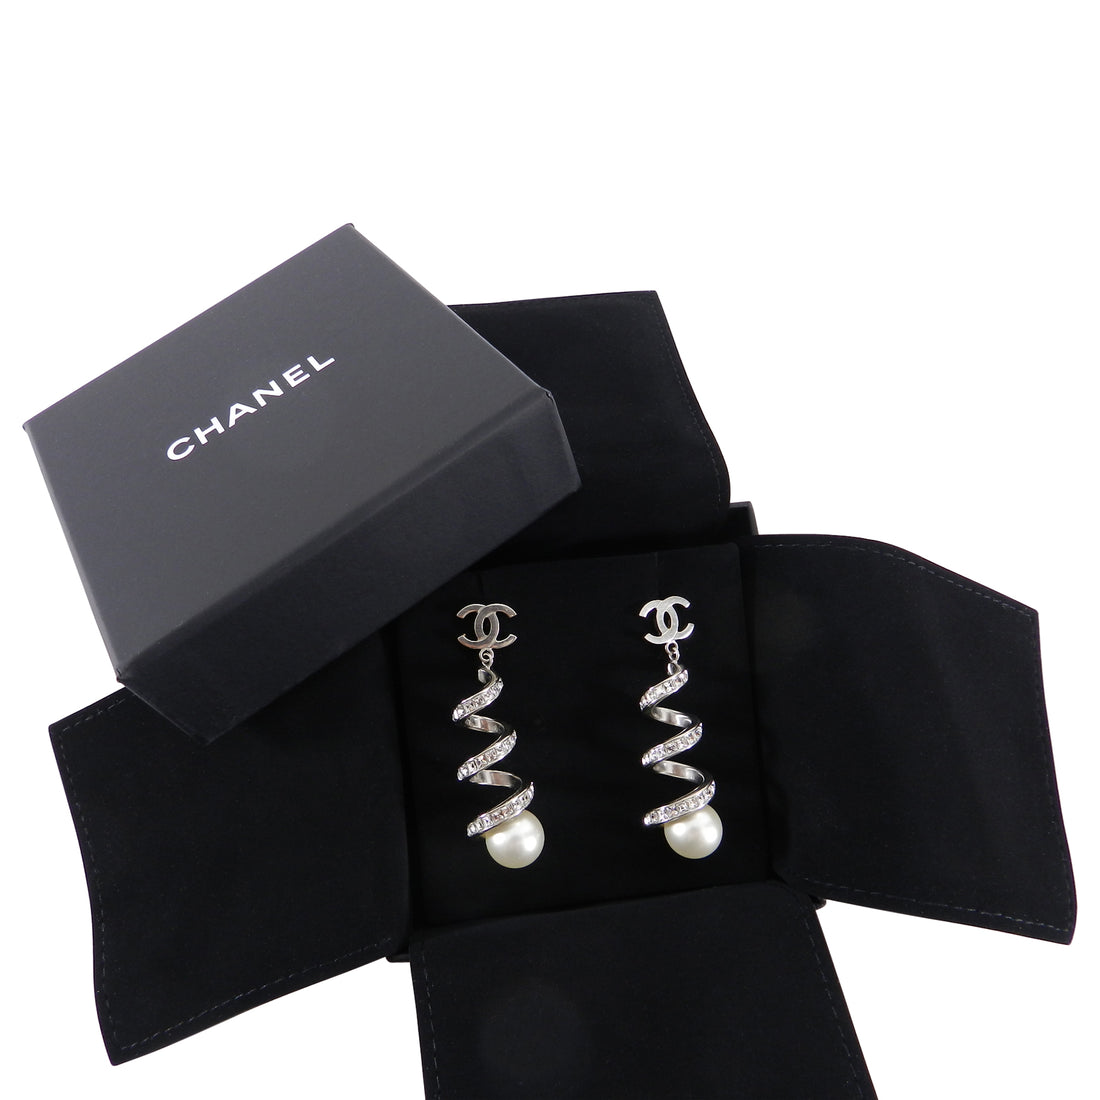 Chanel 15S Silver Rhinestone Spiral Earrings with Pearls